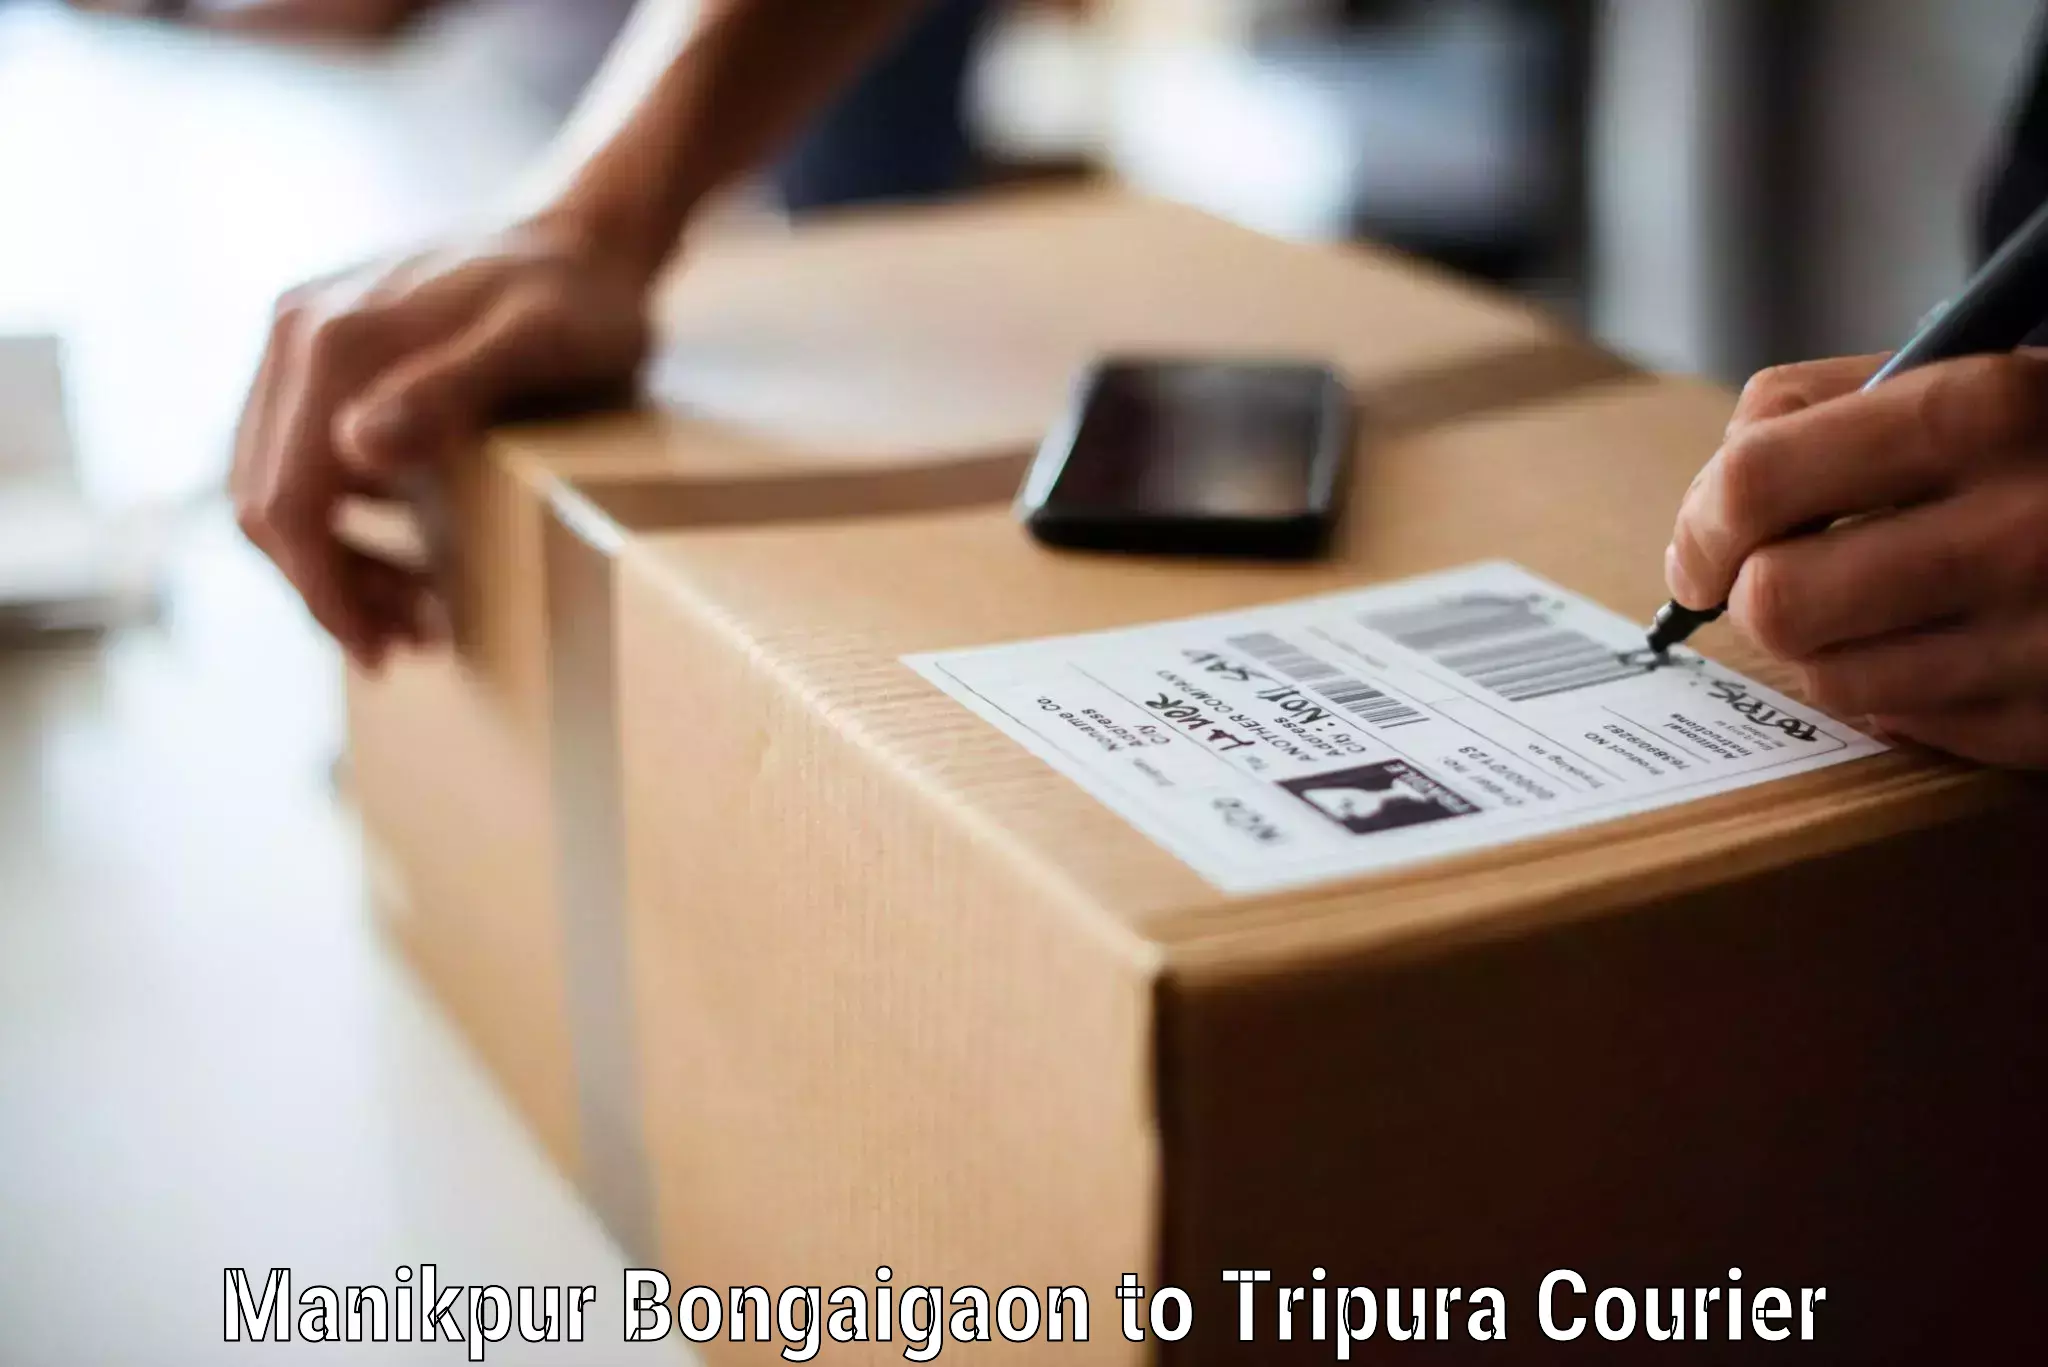 Affordable relocation services Manikpur Bongaigaon to Tripura